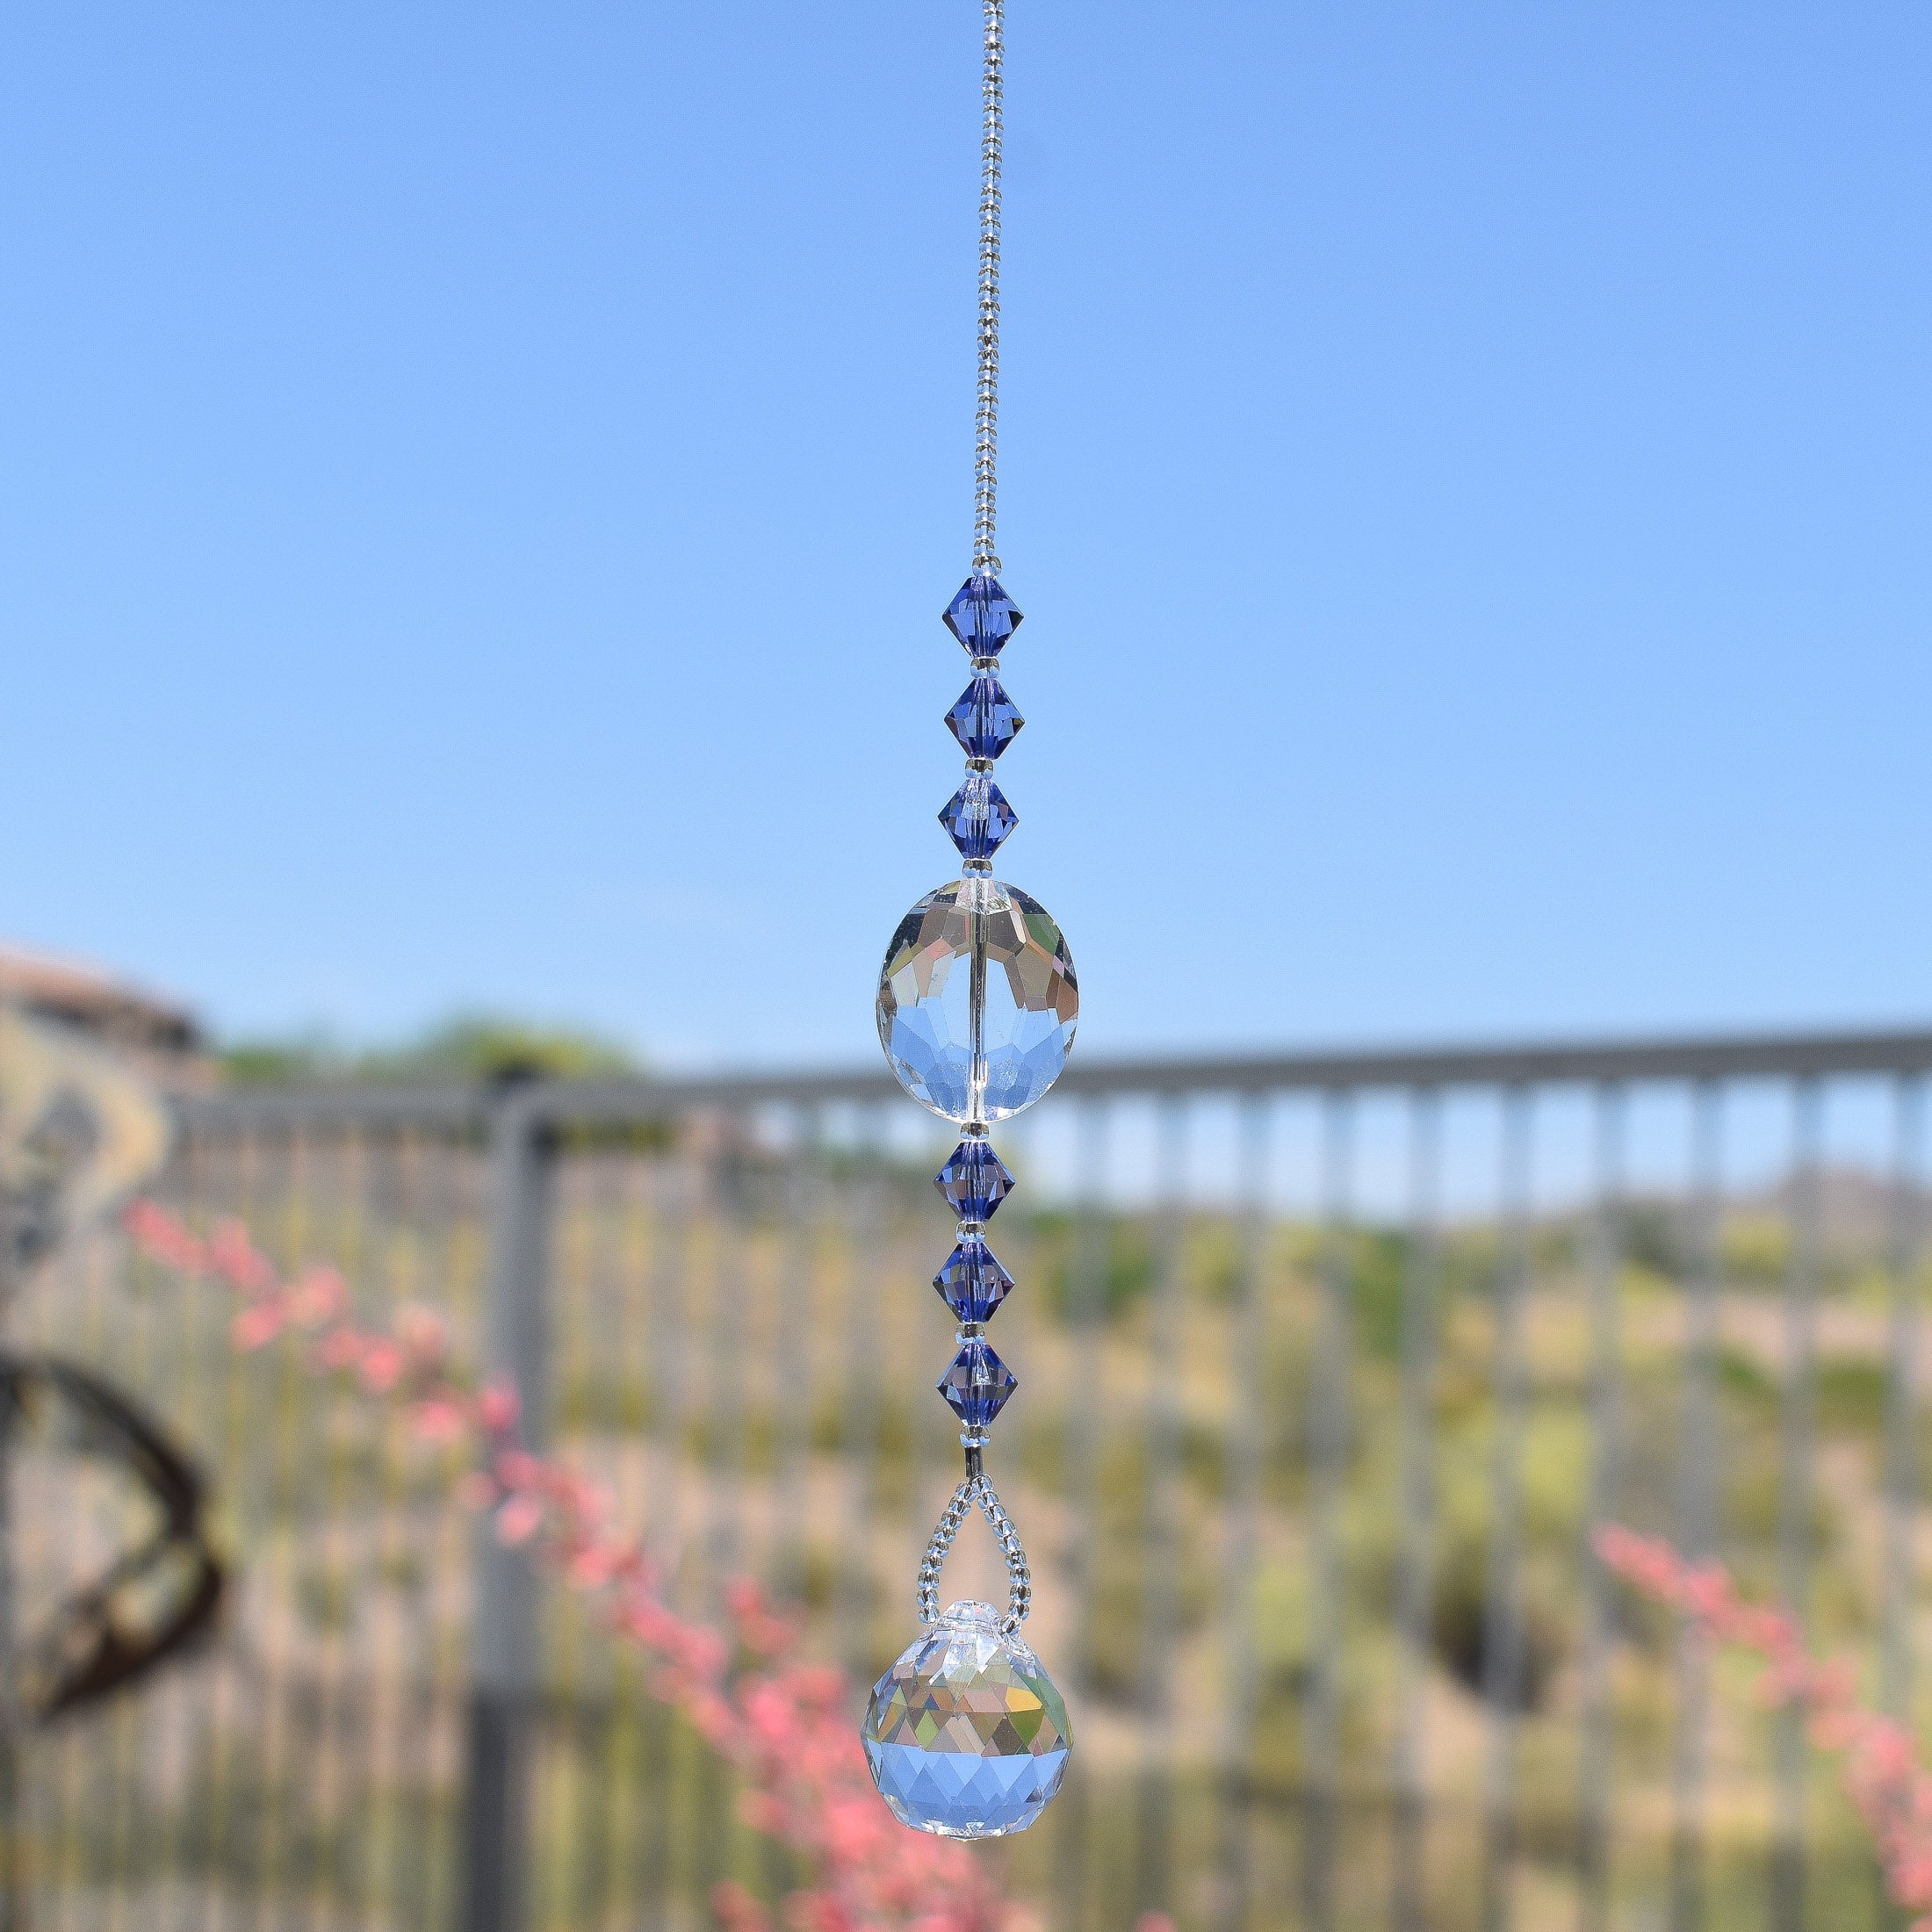 Large, clear glass crystal oval bead hanging vertically with 3 purple crystal beads above and 3 below, anchored by small round crystal prism.